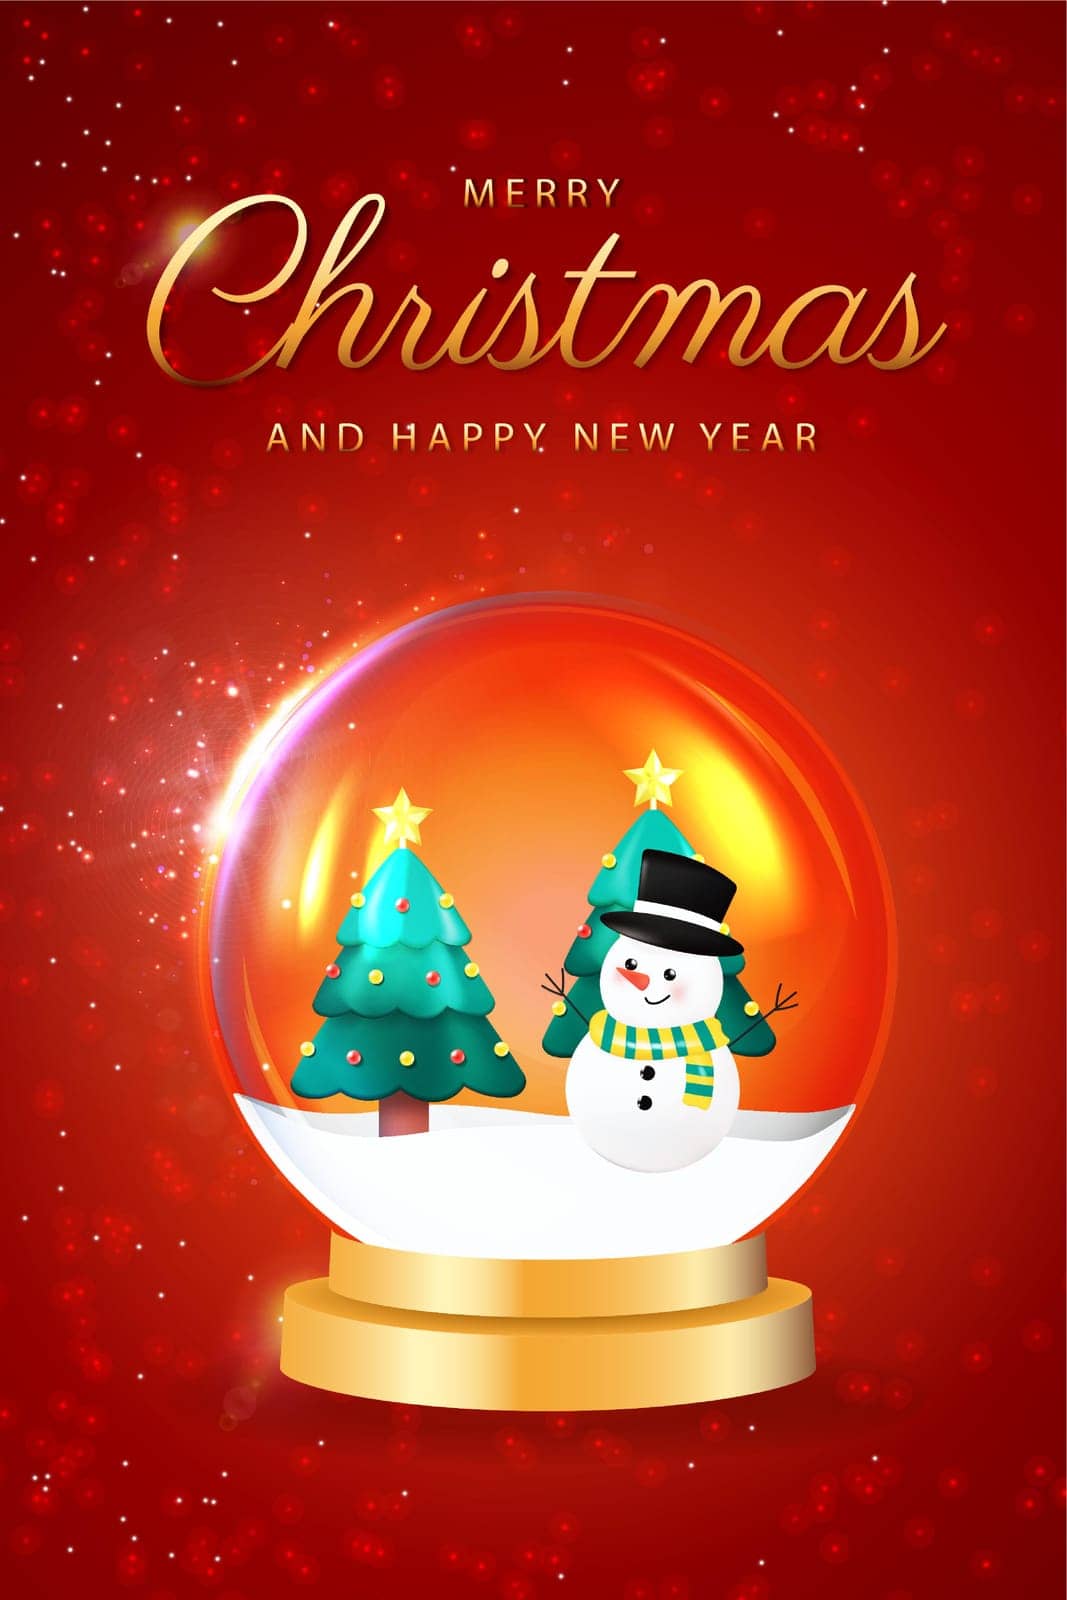 Merry Christmas and Happy New Year. Christmas winter snow glass ball, transparent dome. design Xmas green tree in snow, gift box, snowman. Vector illustration..